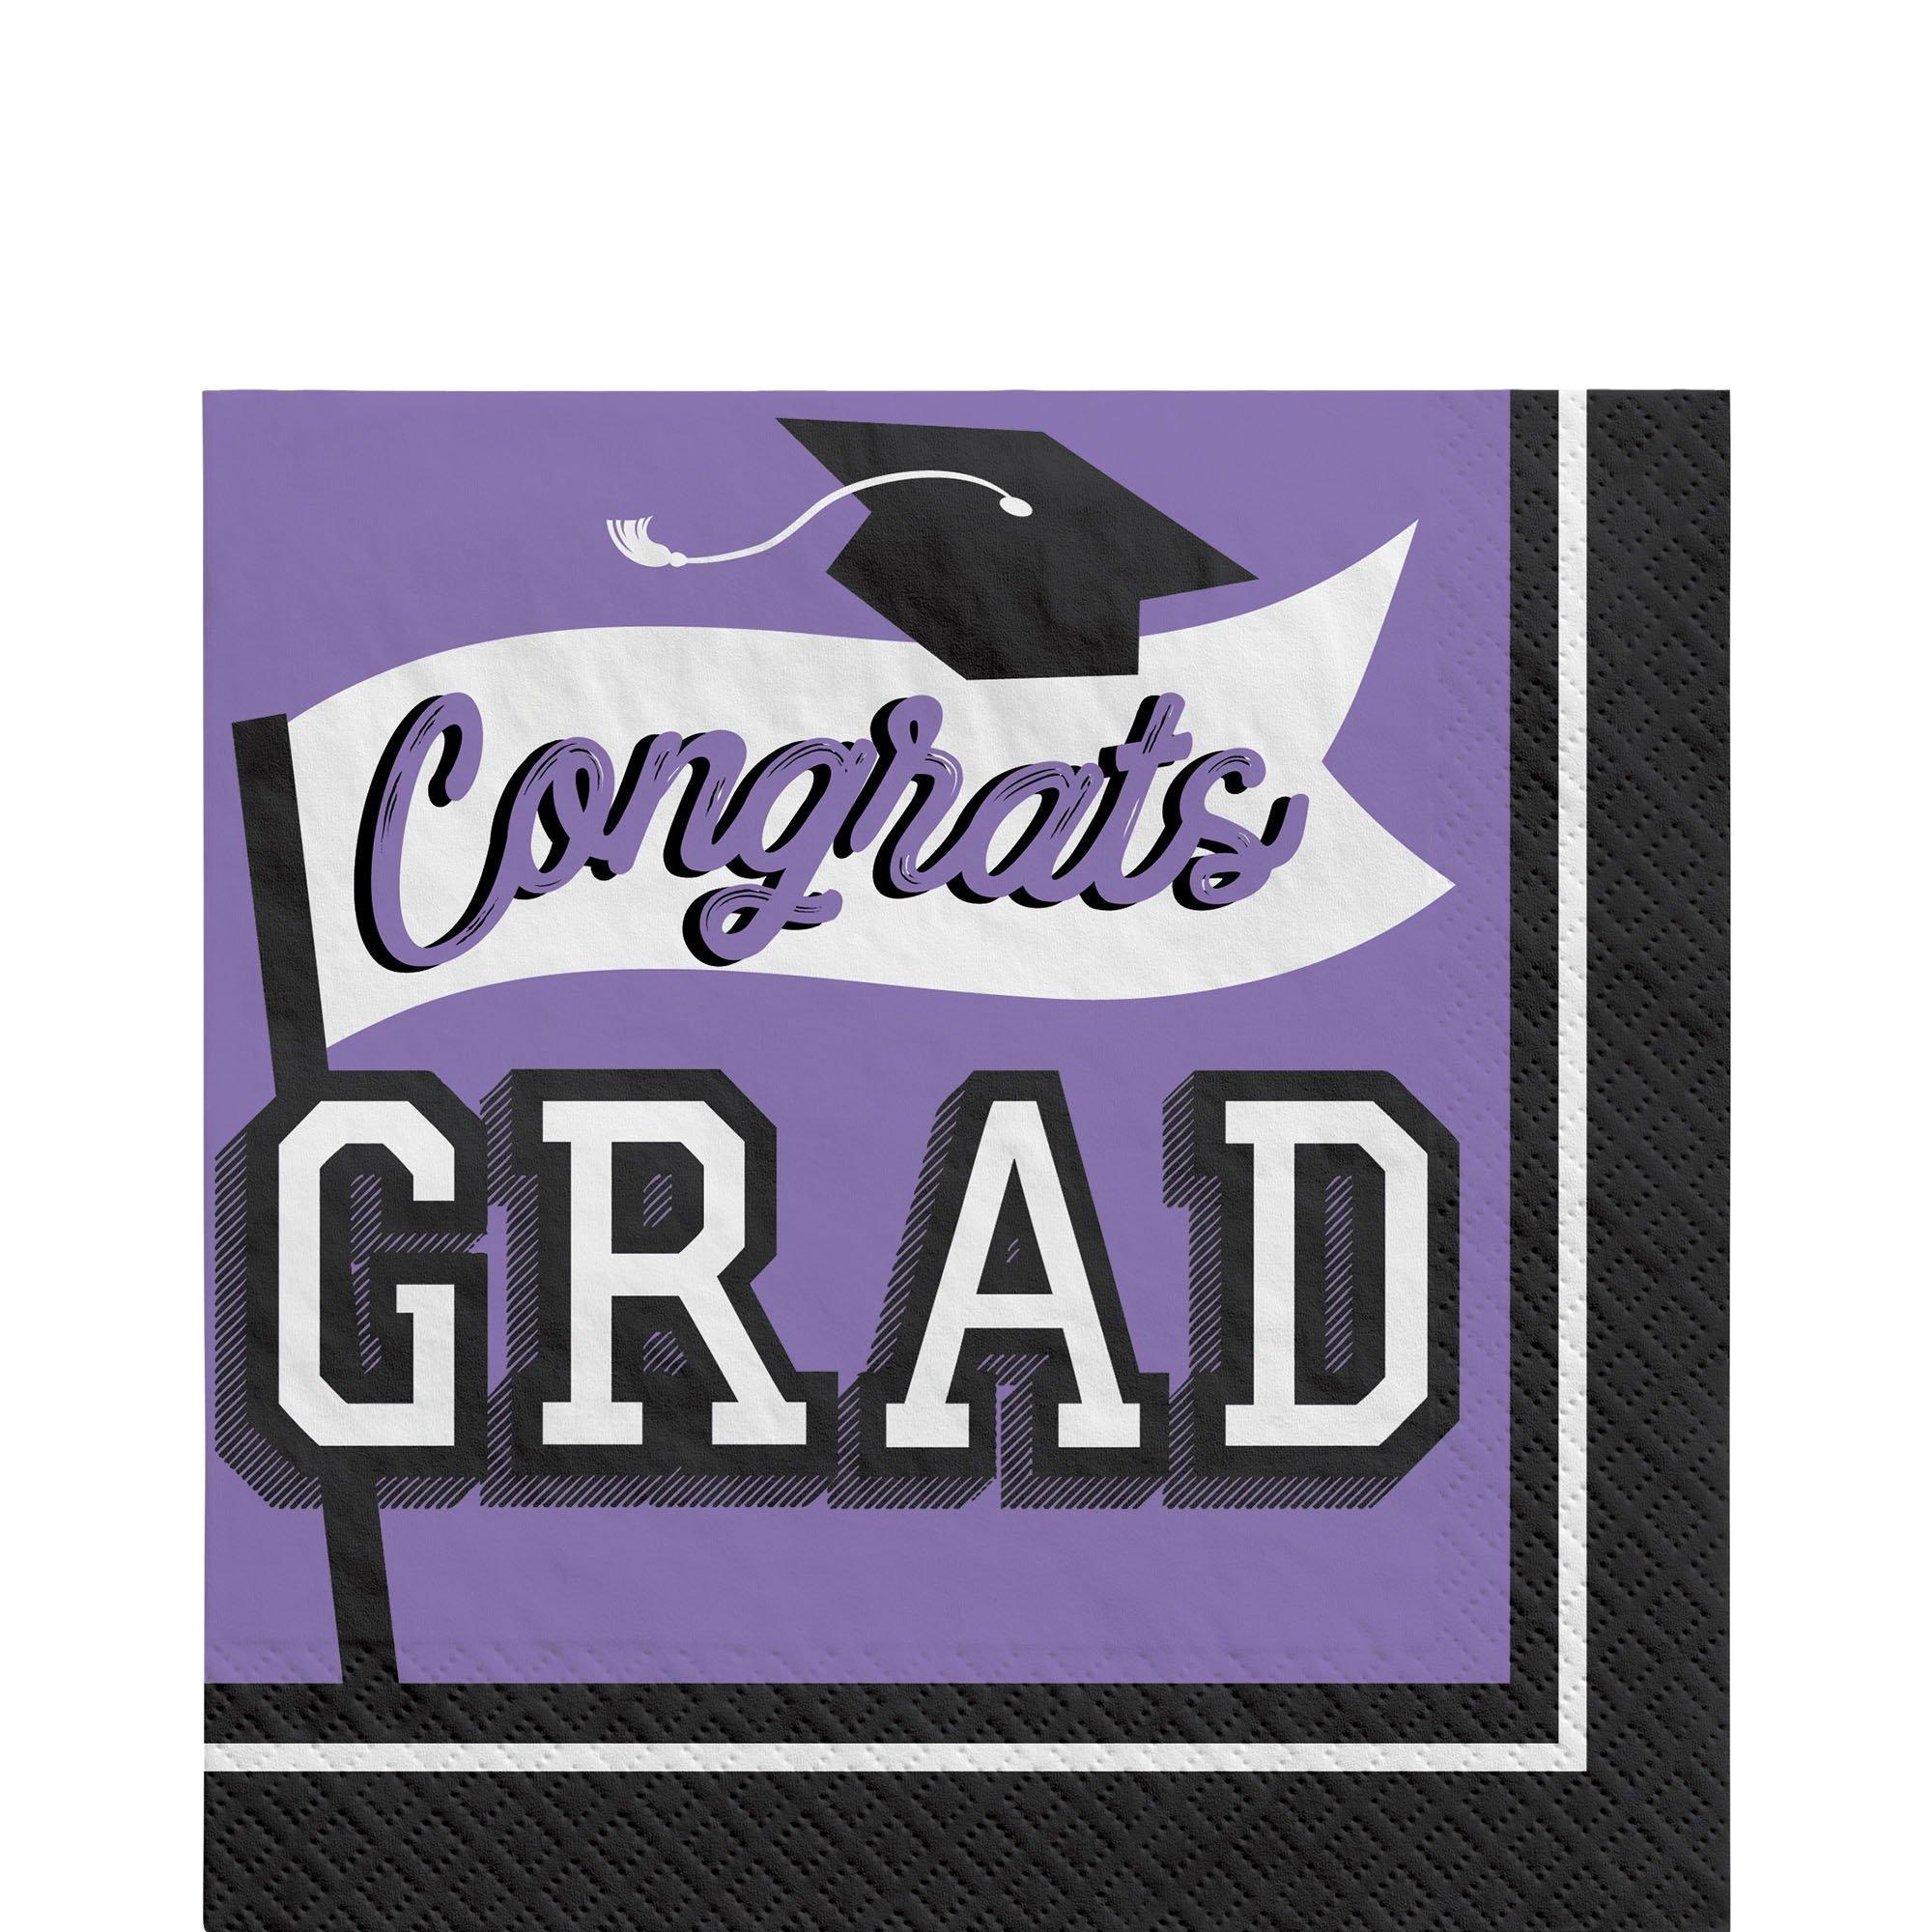 Graduation Party Supplies Kit for 40 with Decorations, Balloons, Plates, Napkins, Cups - Purple Congrats Grad